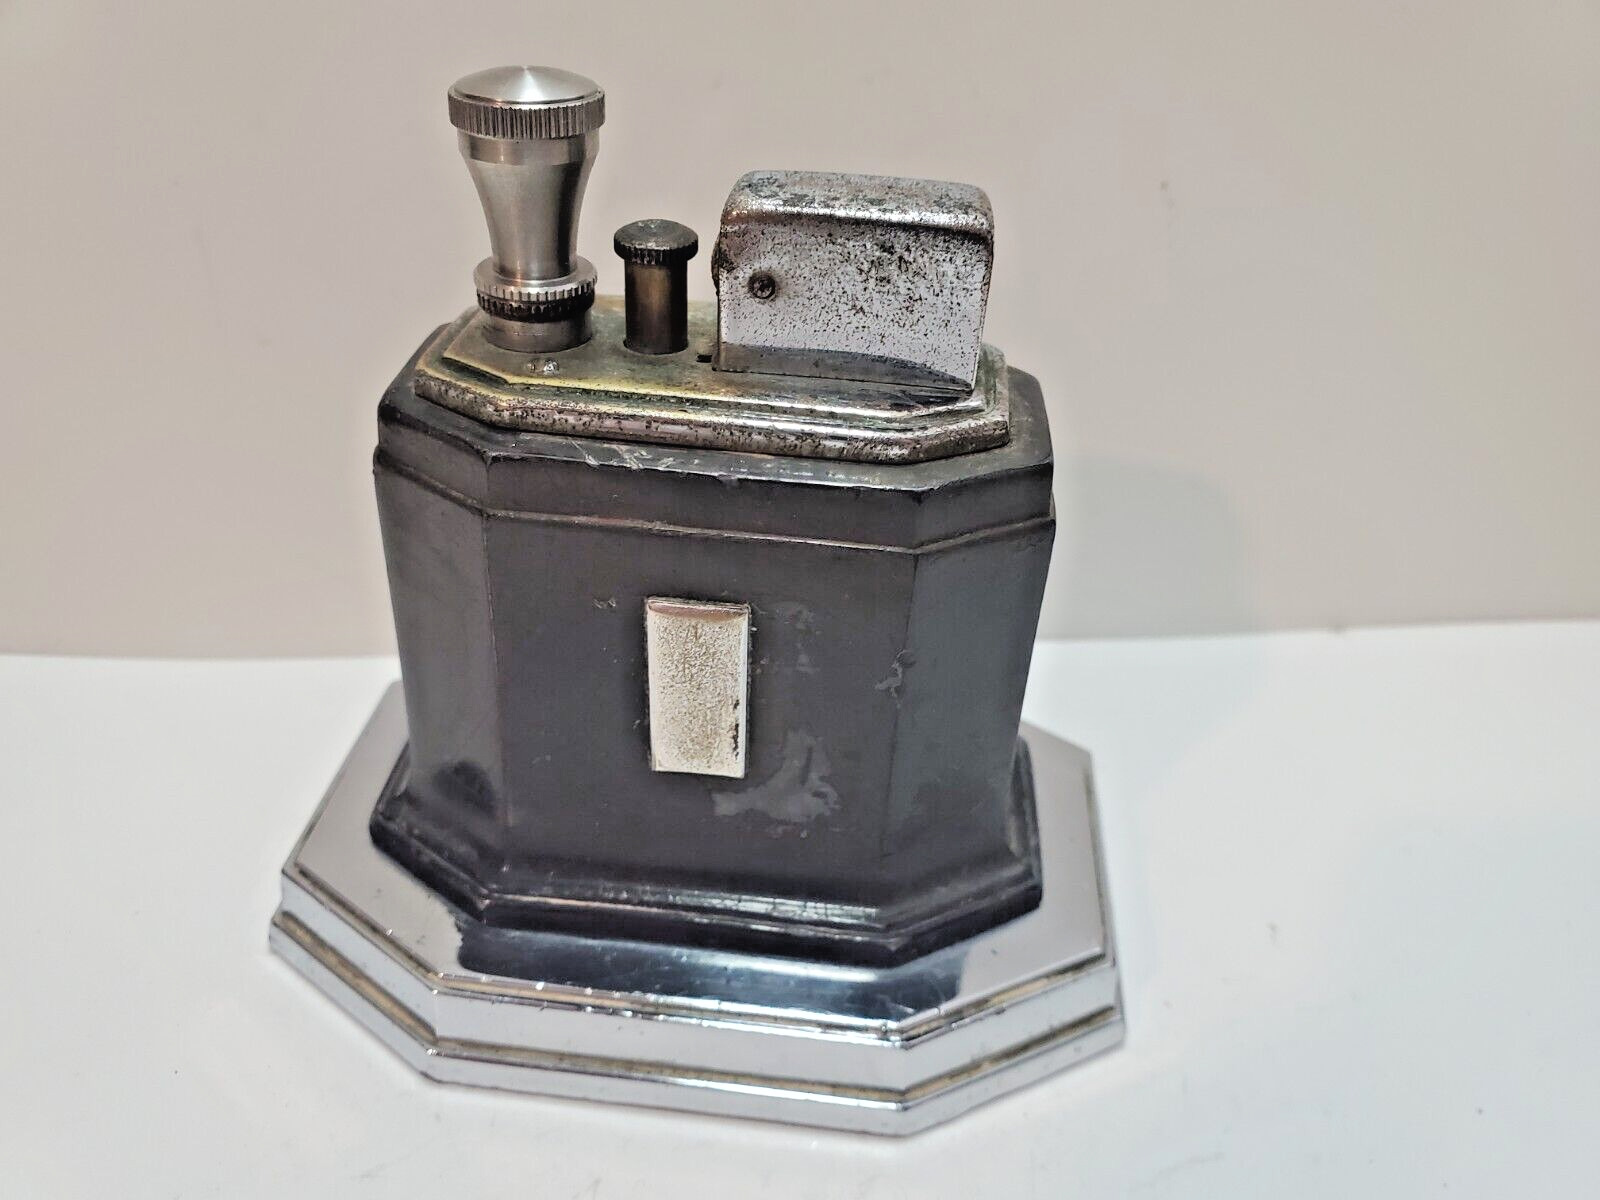 Working Ronson 1940 Art Deco Table Touch Tip Octette Black, Silver Tone Lighter